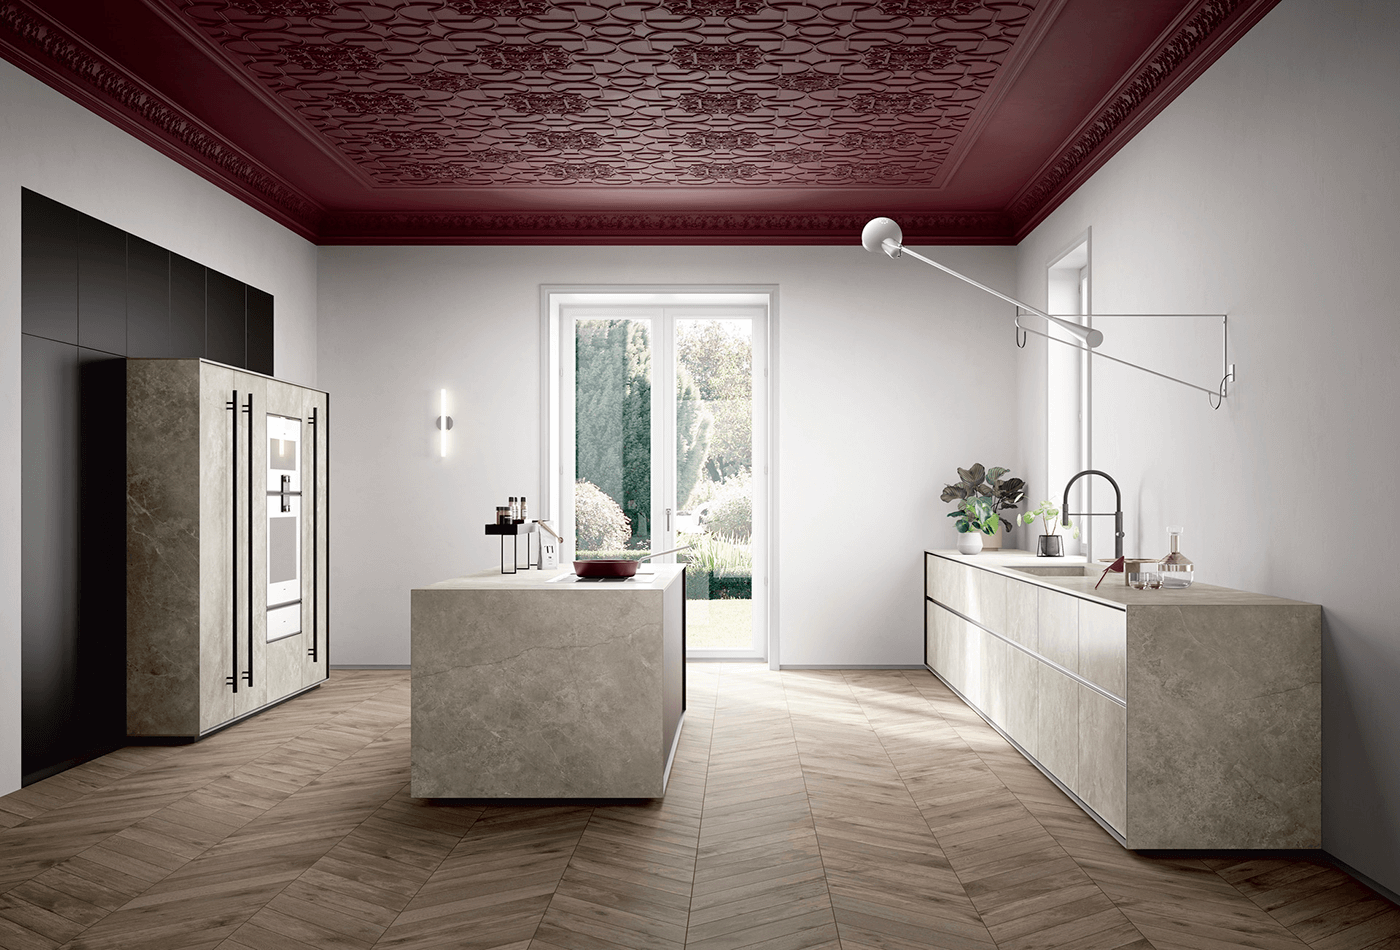 Fior Di Bosco Porcelain Beckons Vibrancy and Richness!